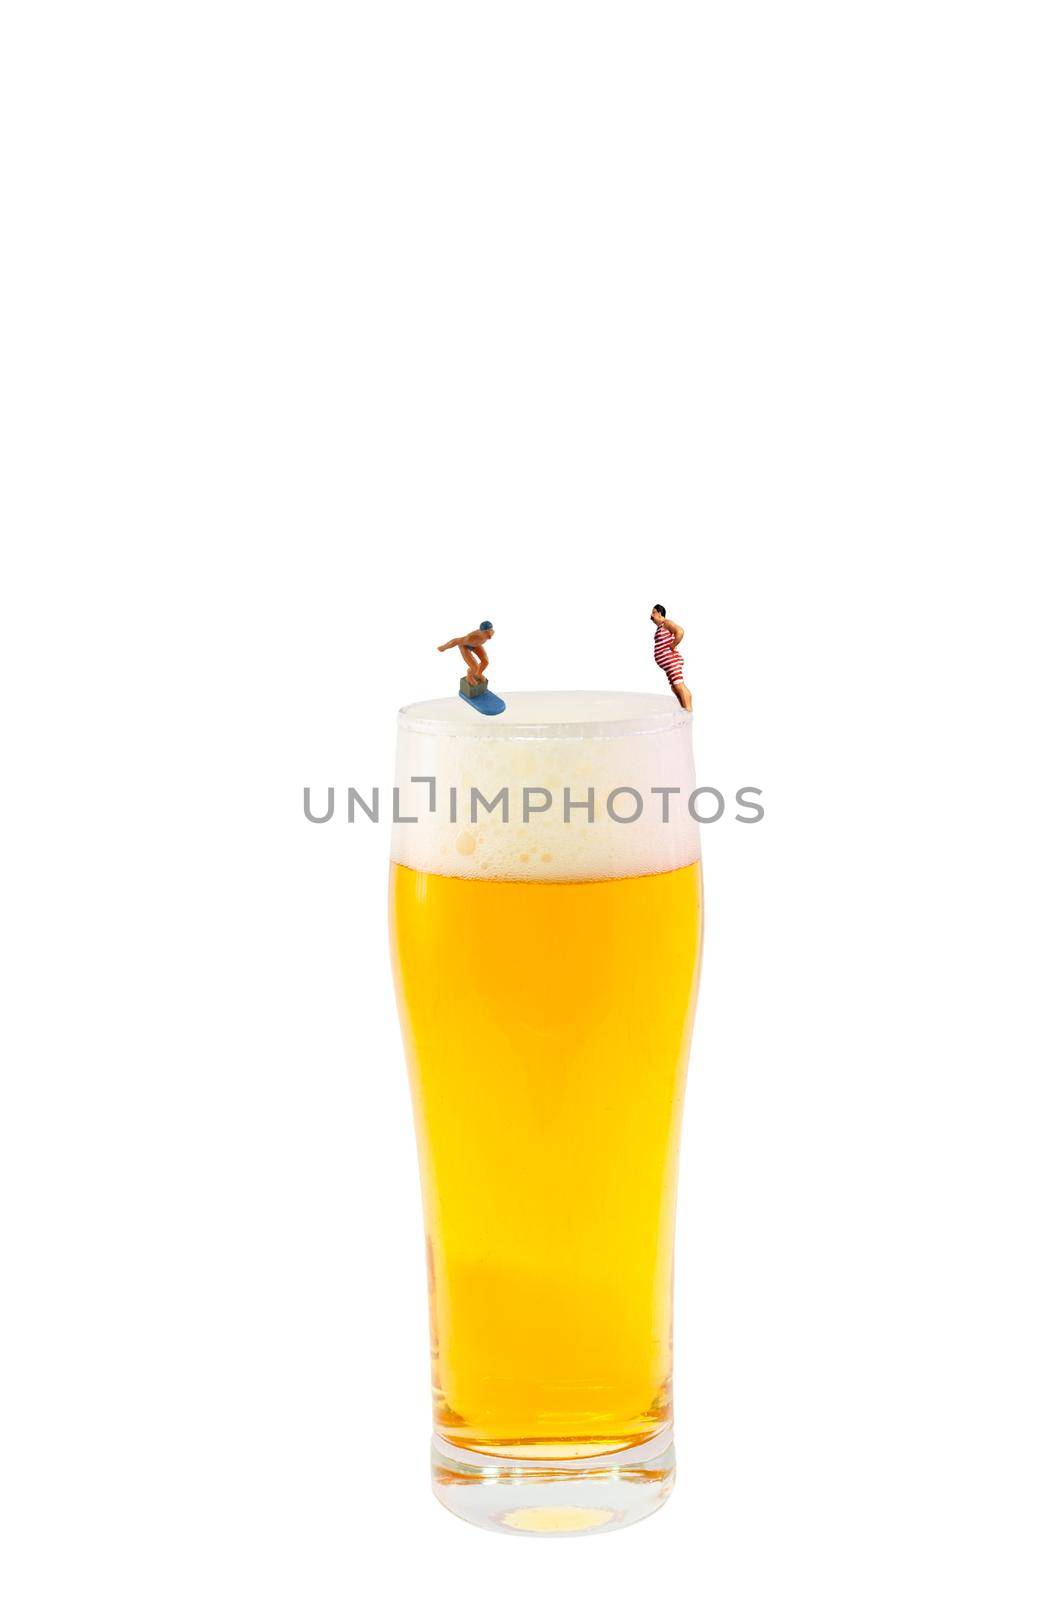 Miniature photography, miniature figures with beer glass    by JFsPic